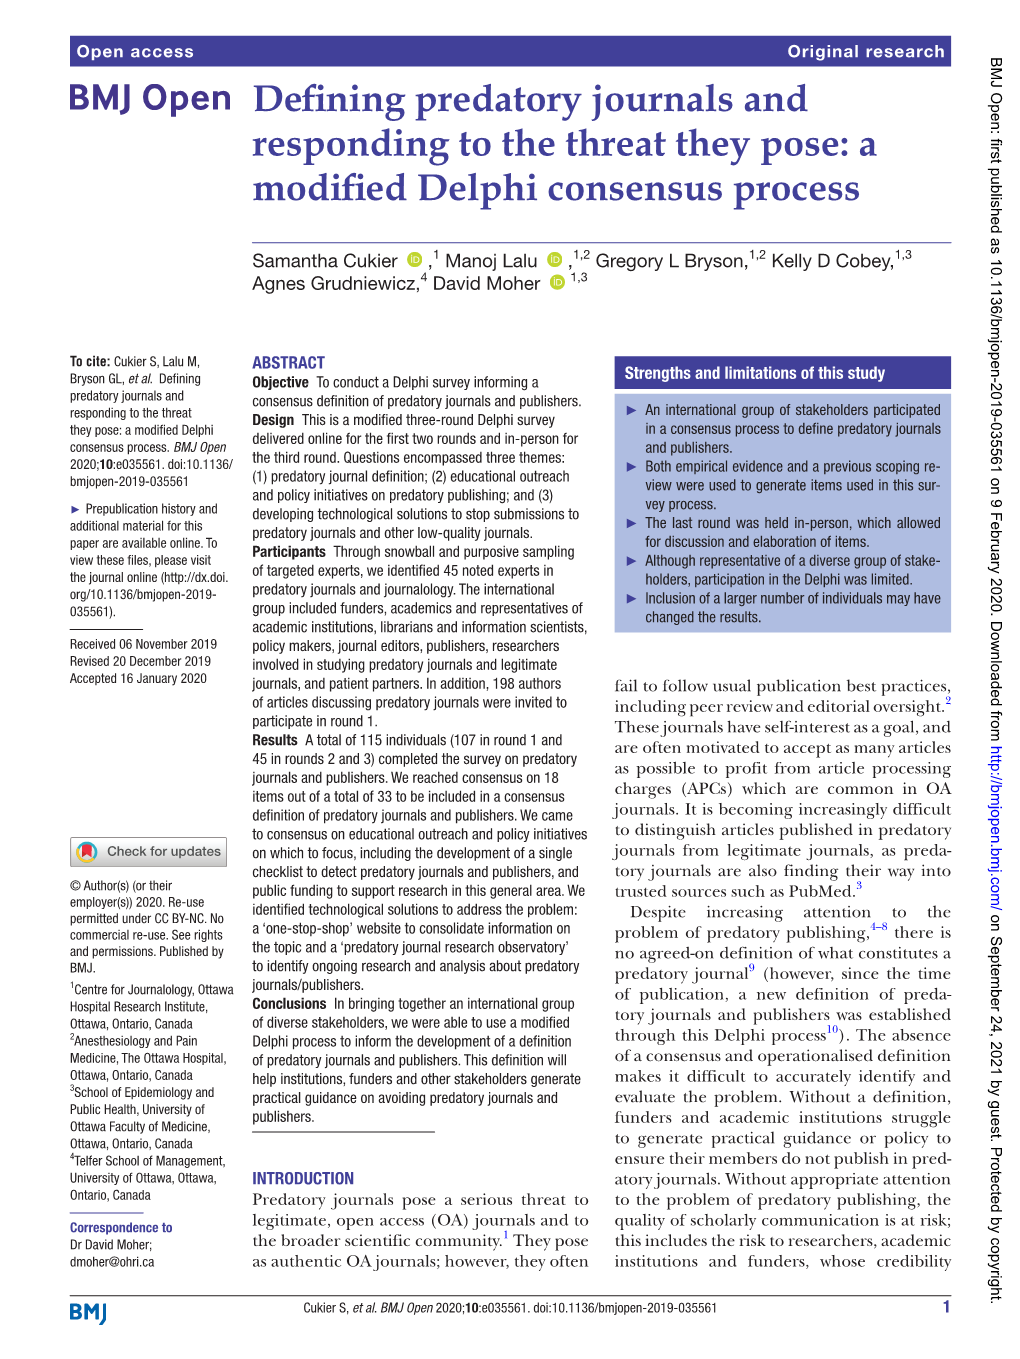 Defining Predatory Journals and Responding to the Threat They Pose: a Modified Delphi Consensus Process